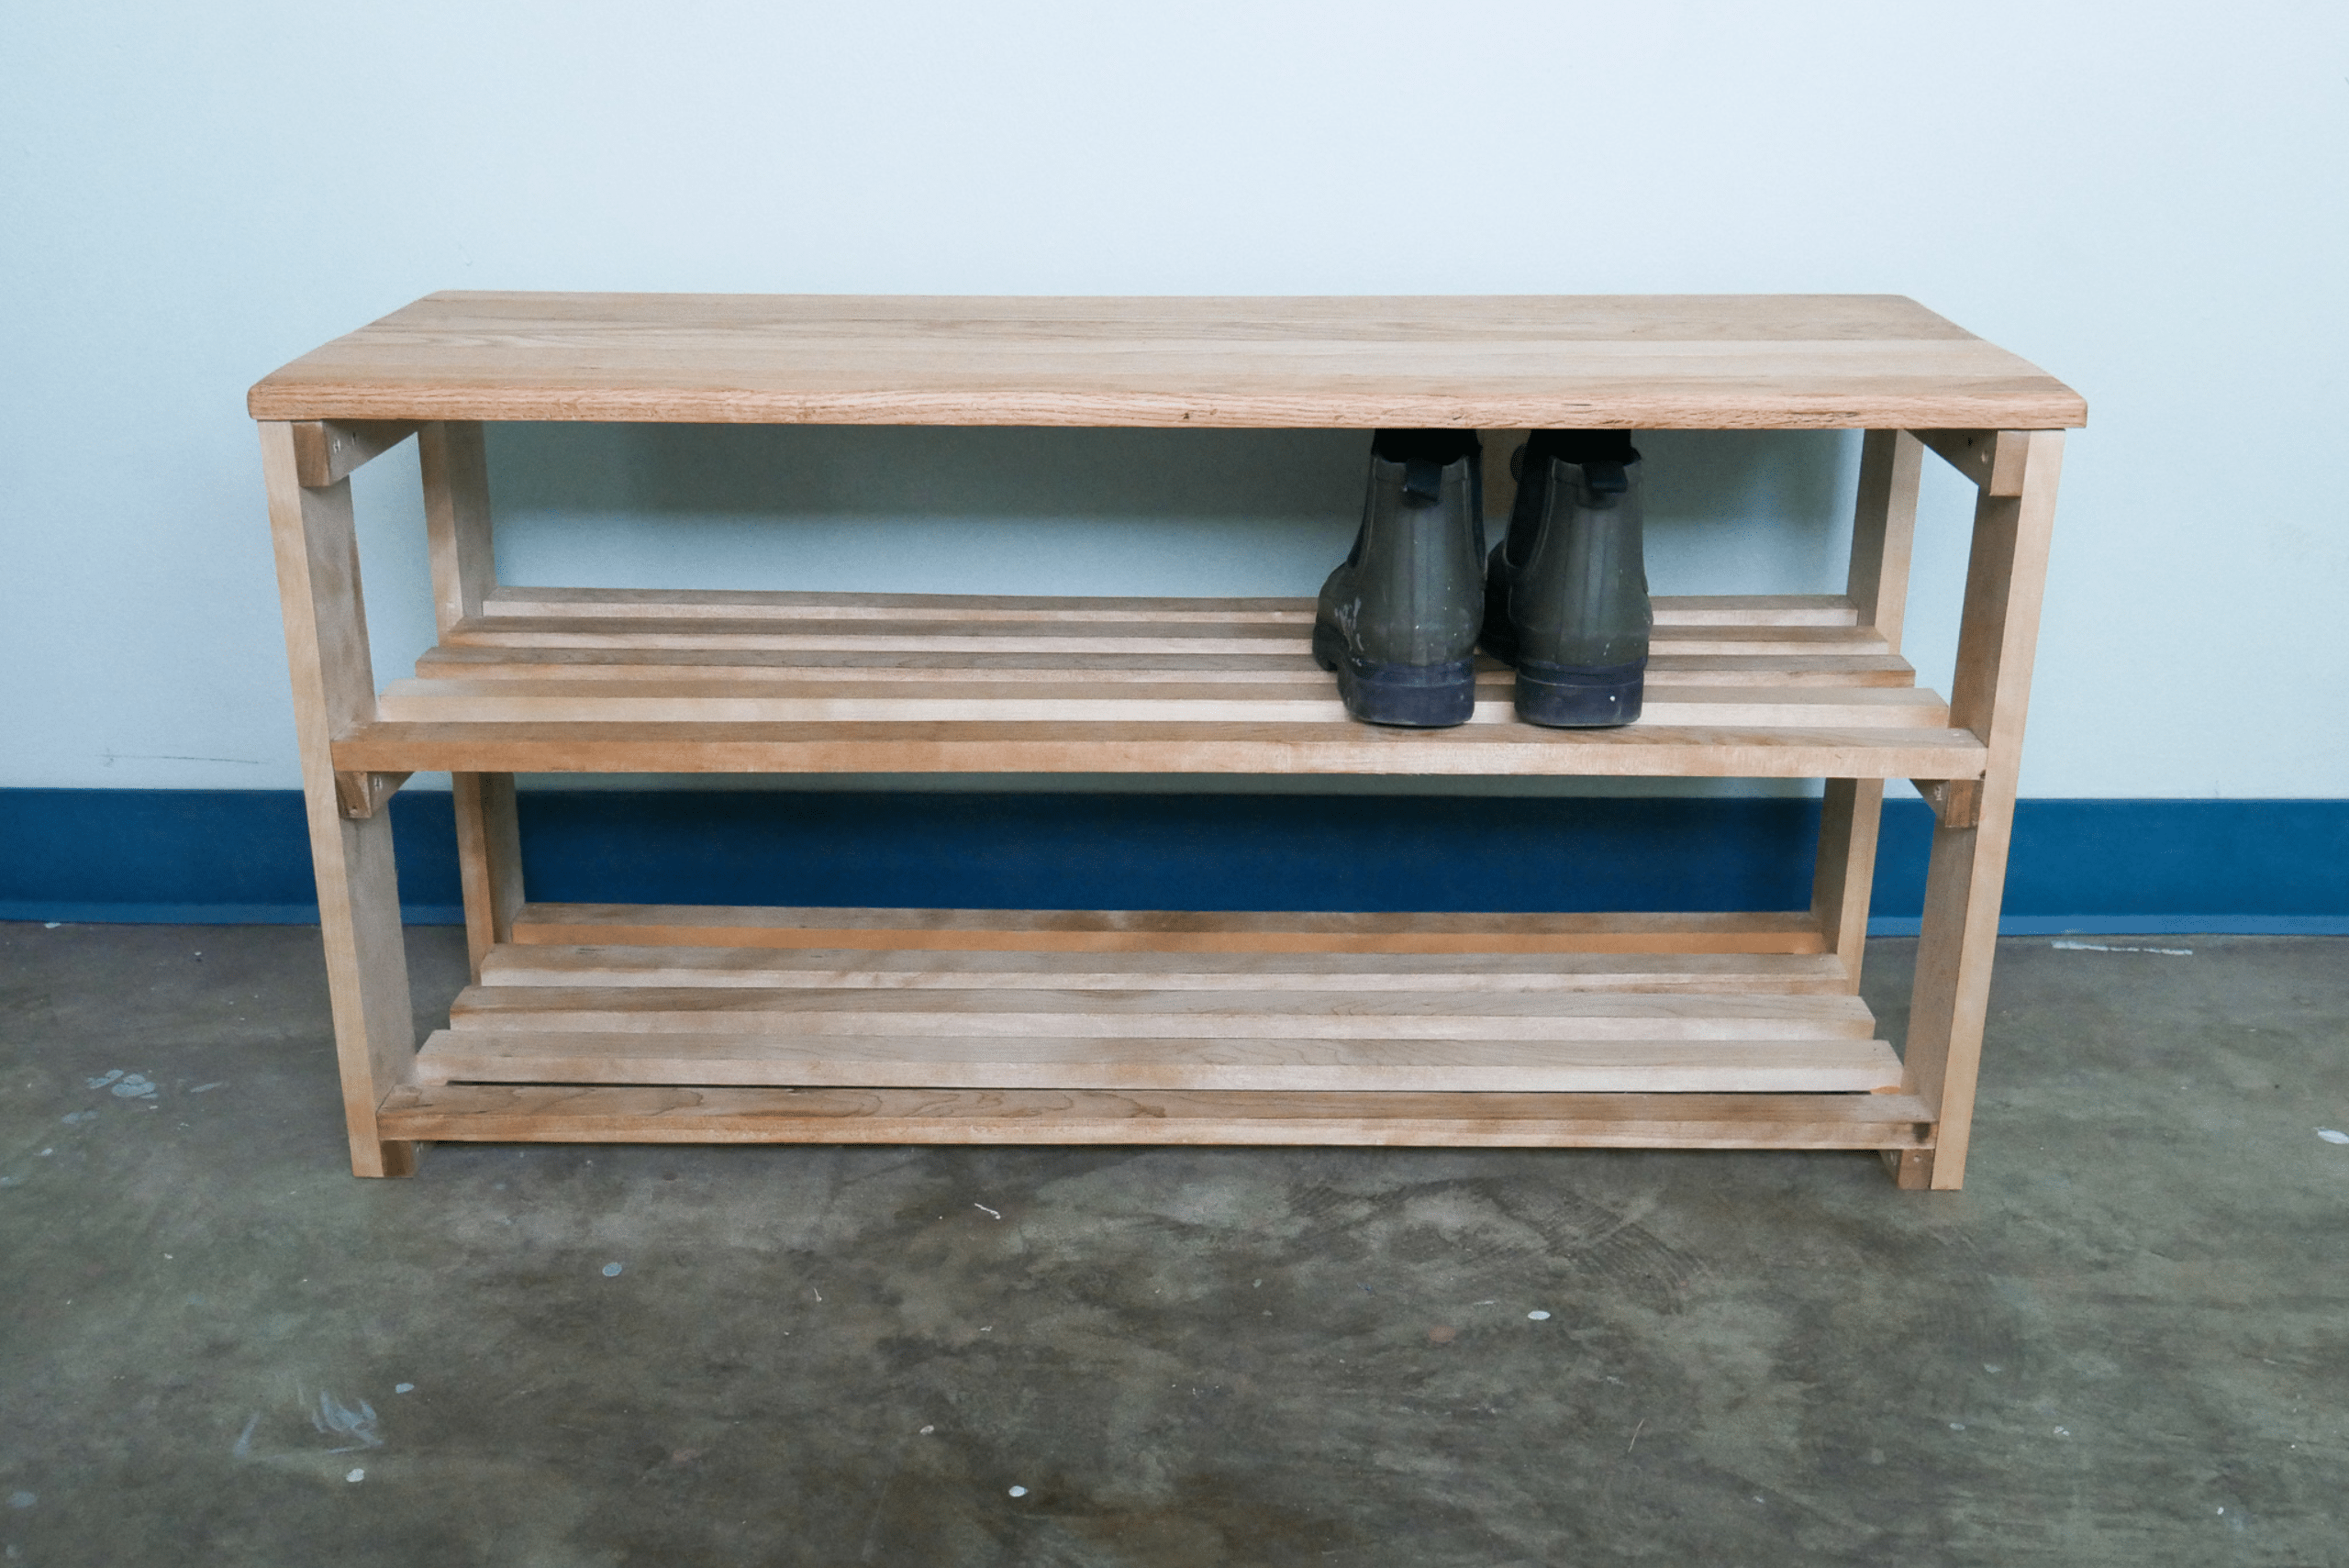 Unfinished DIY wooden shoe rack with one pair of shoes on the second shelf.